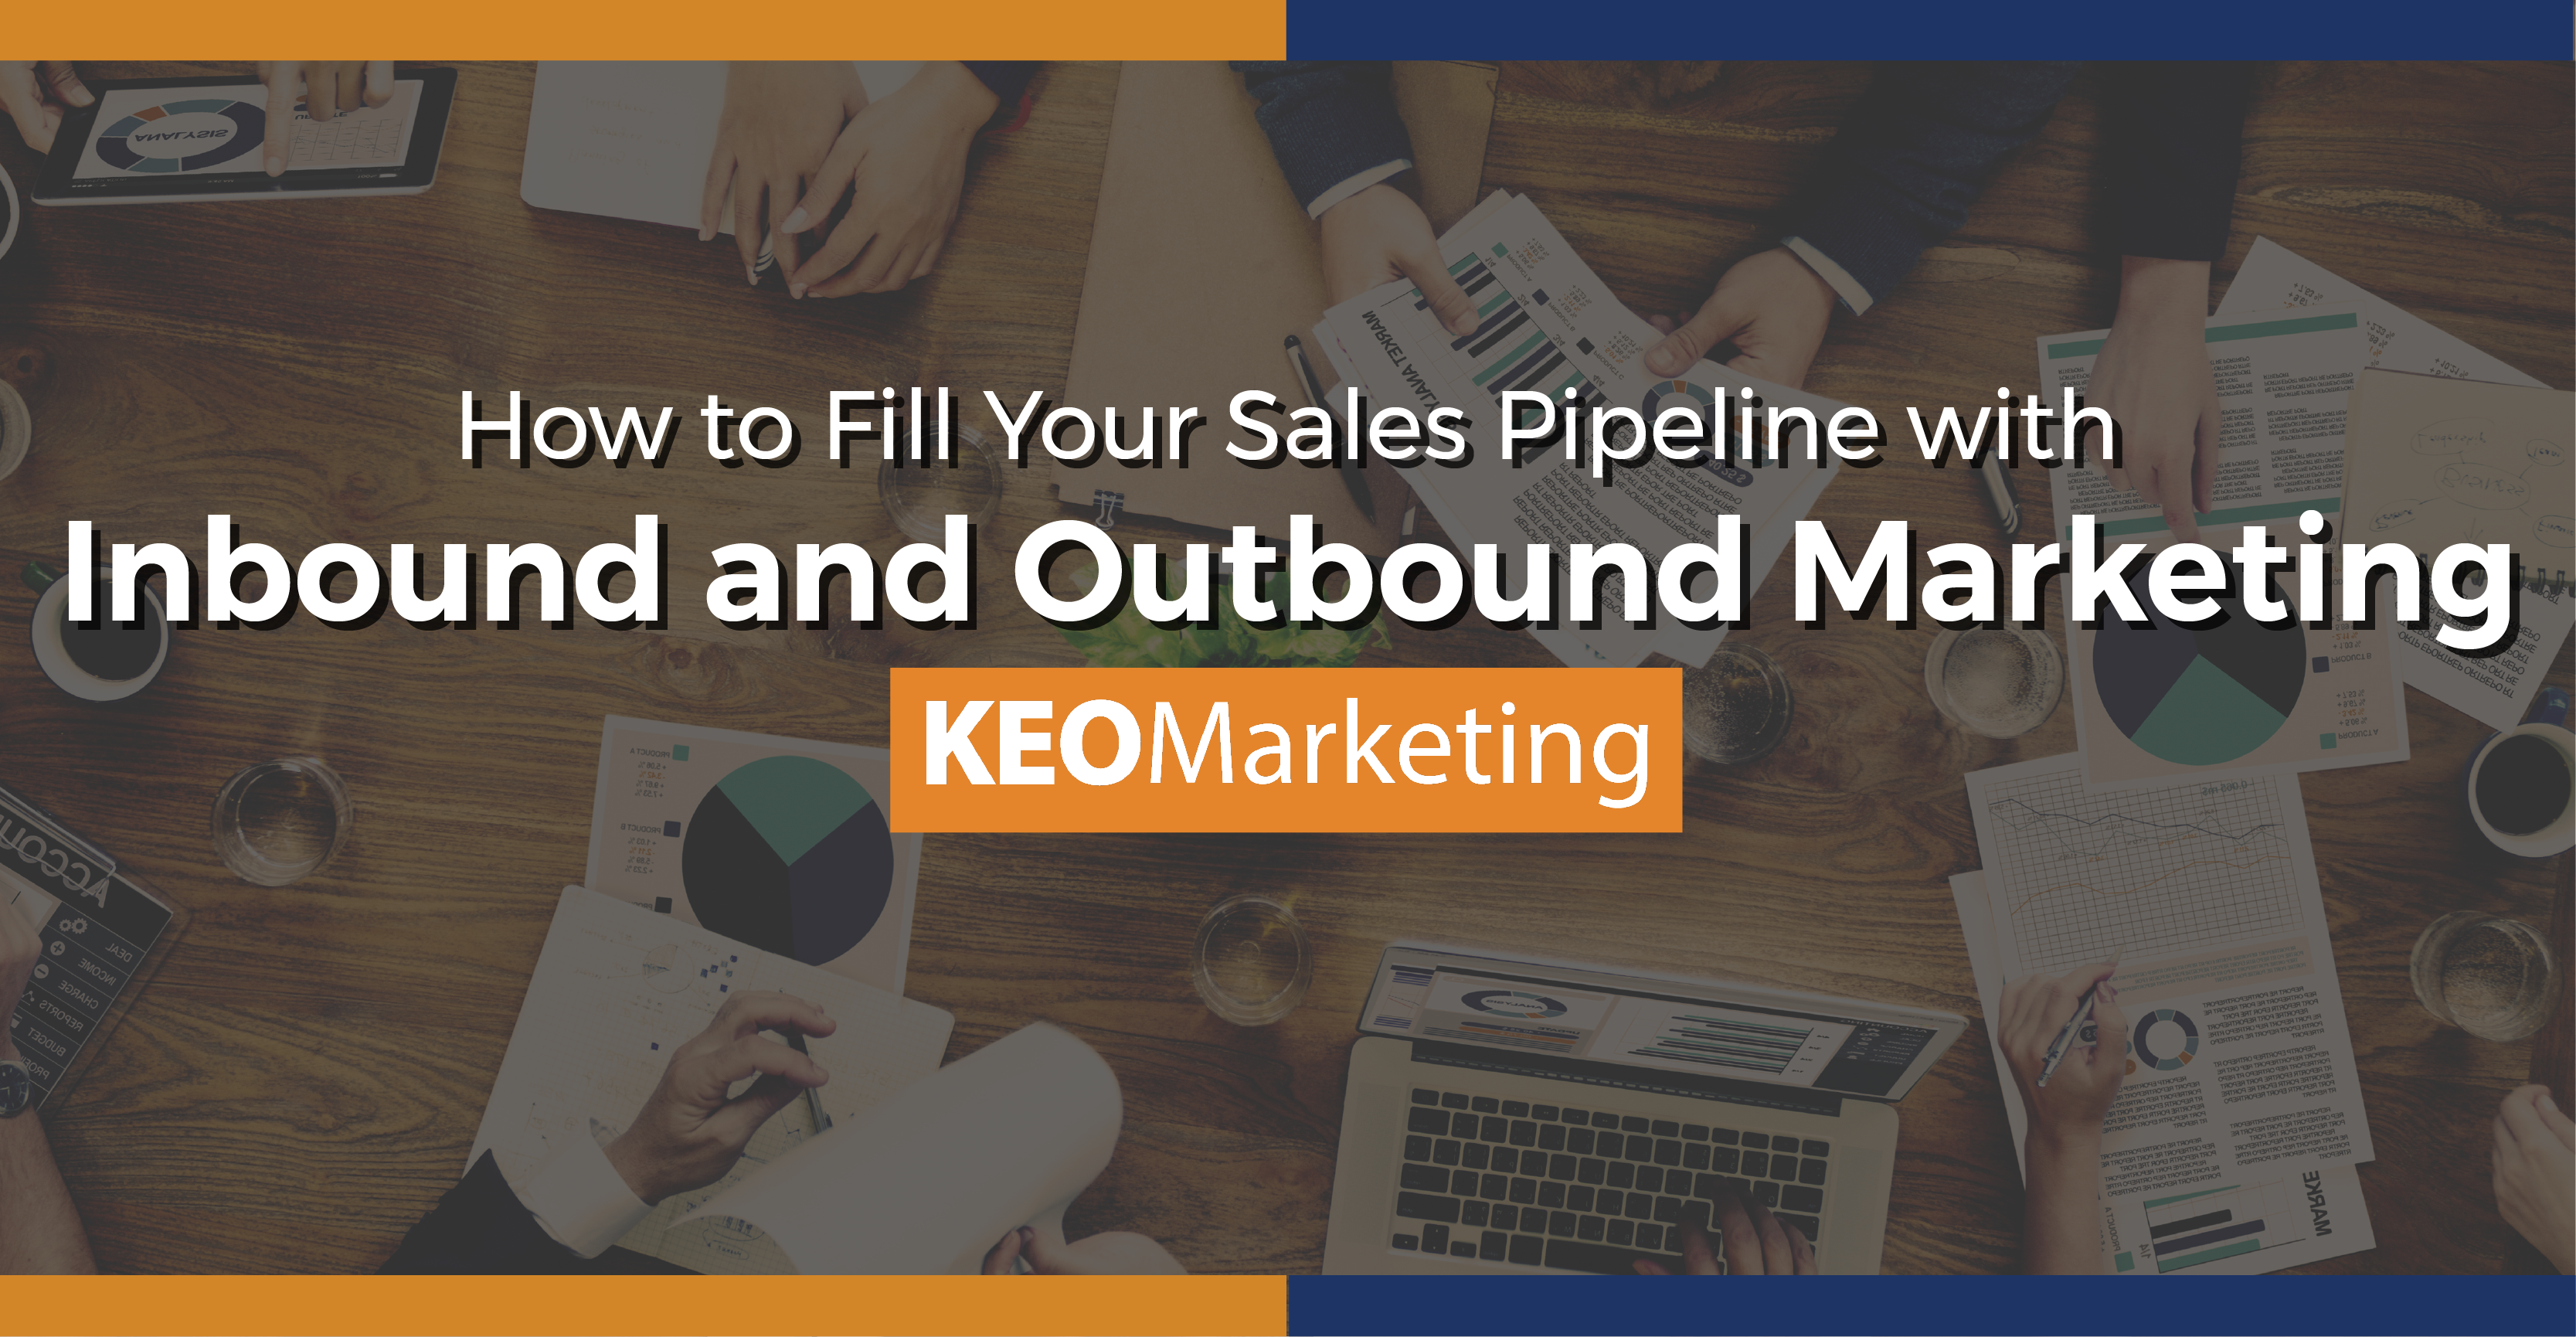 How Inbound and Outbound Marketing Fills Your Sales Pipeline